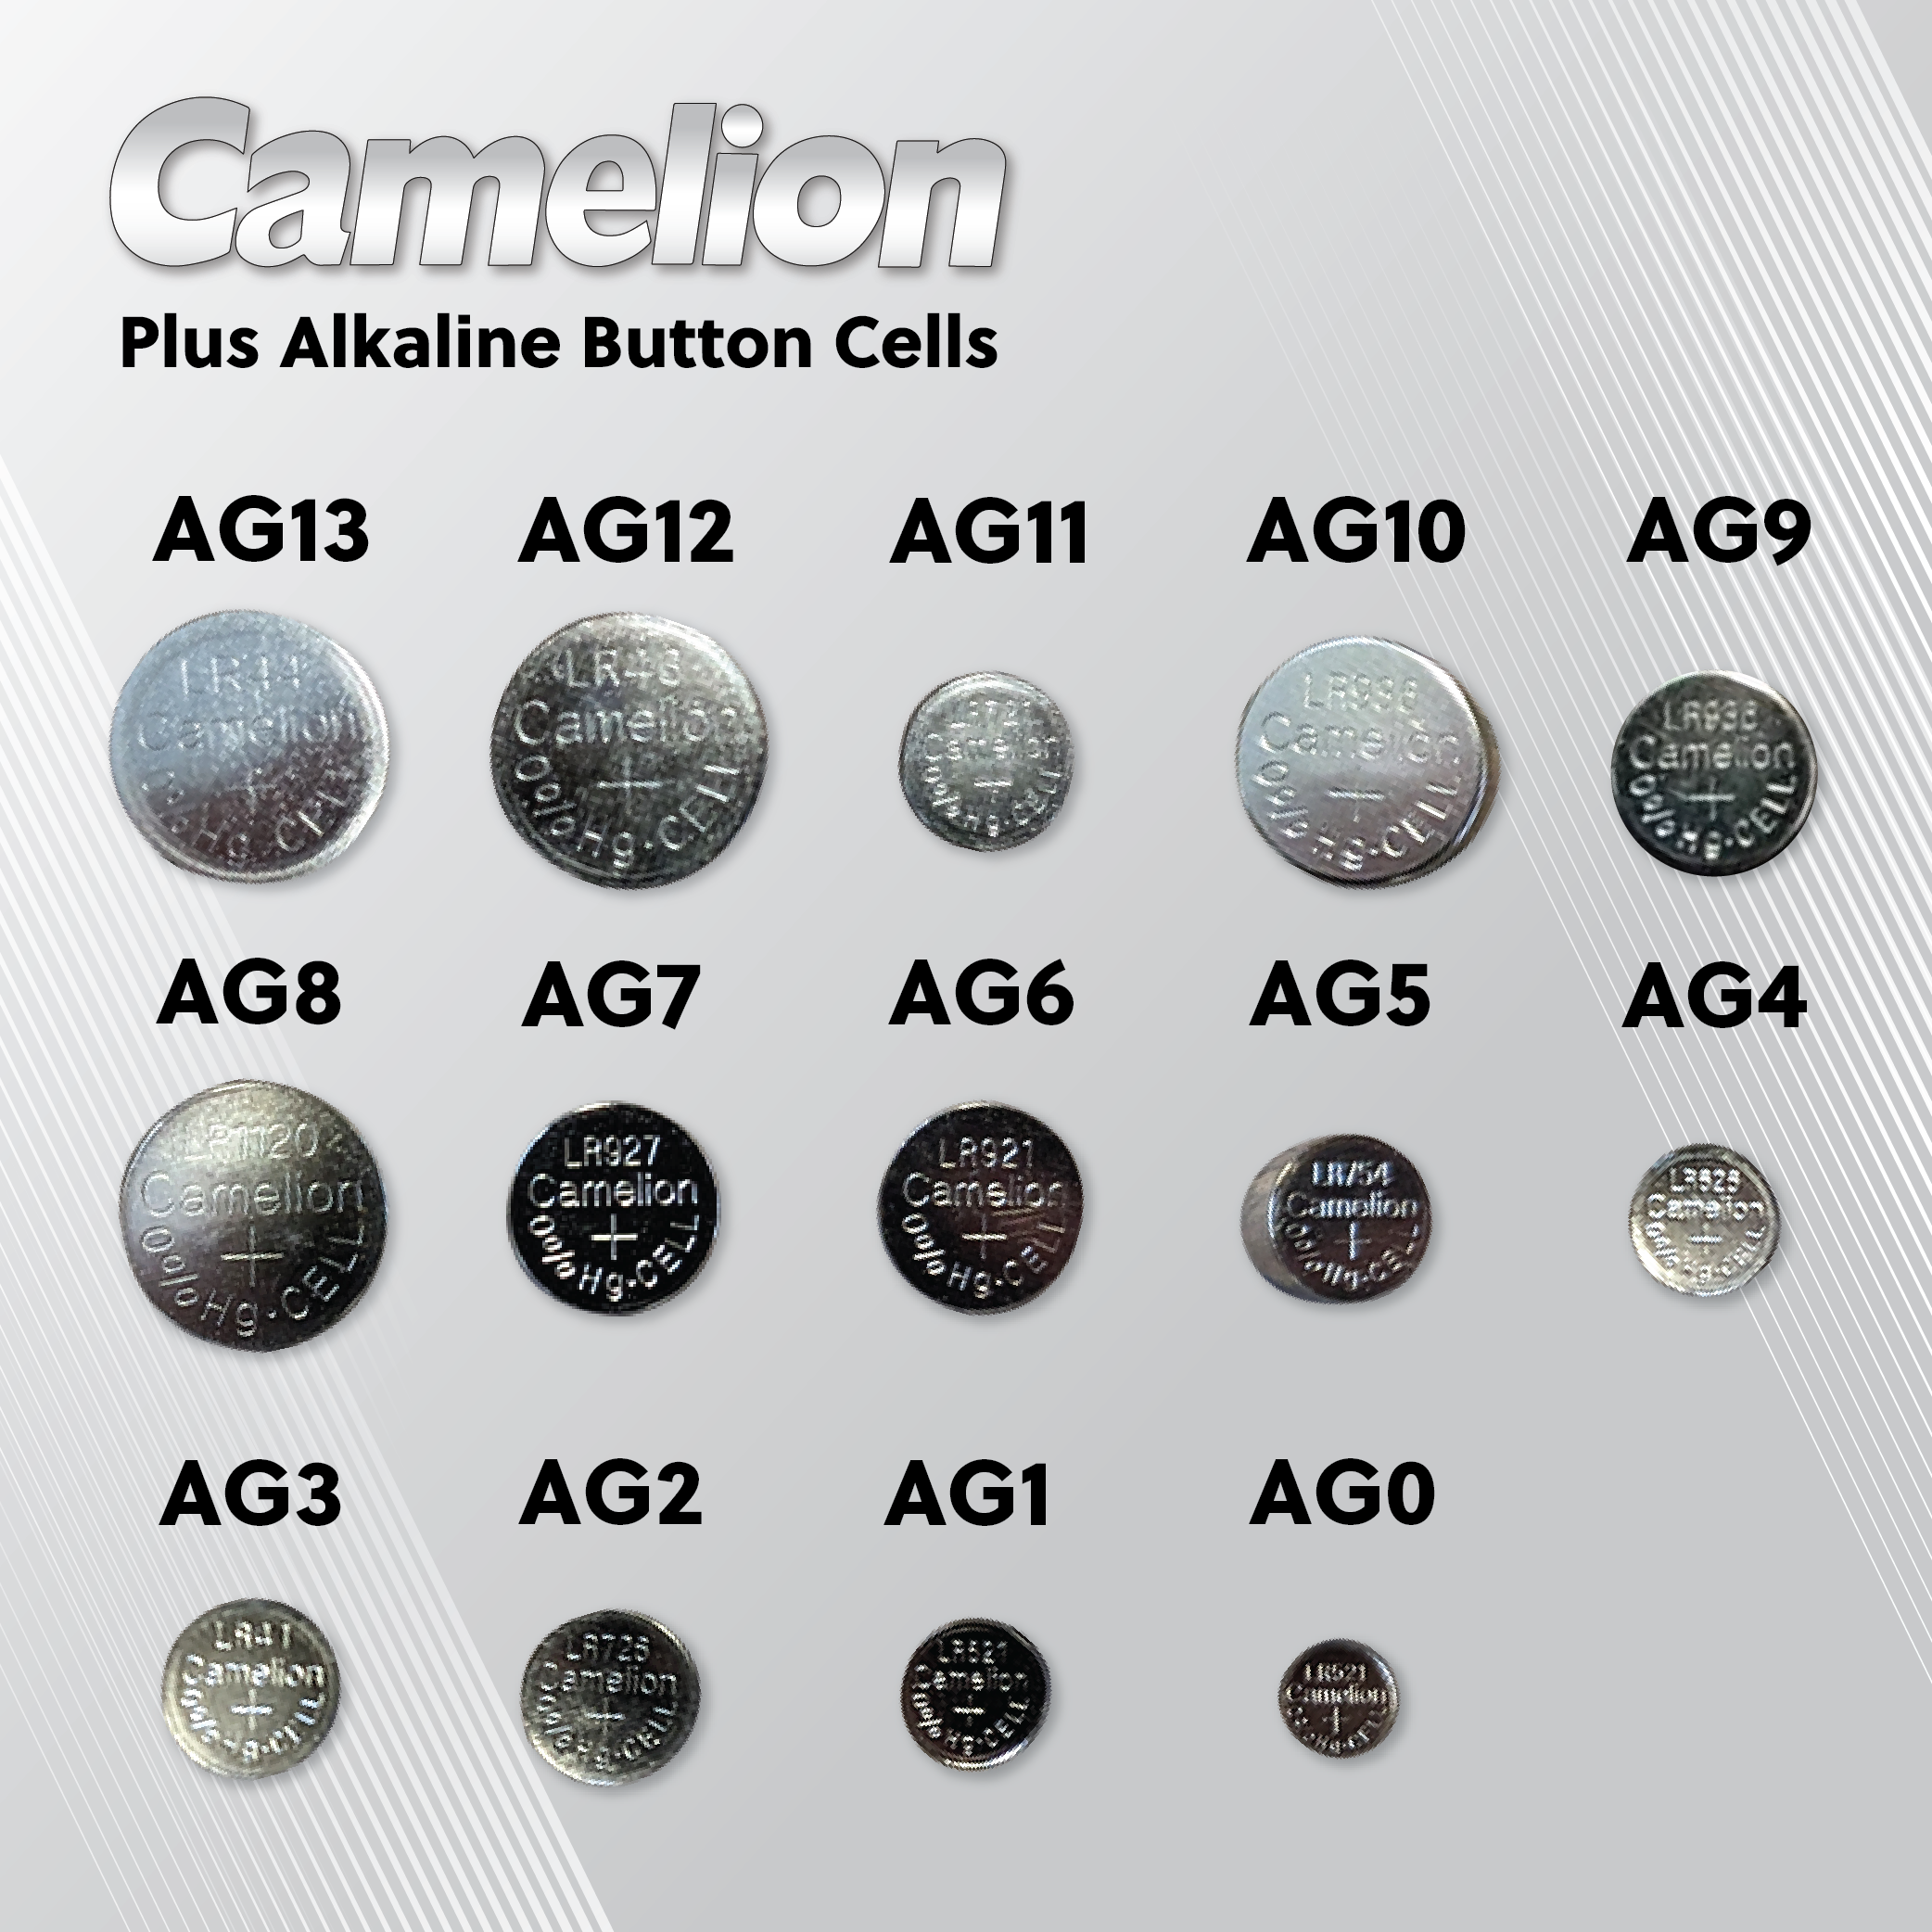 Camelion AG0 / 379 / LR521 1.5V Button Cell Battery (Two Packaging Options)